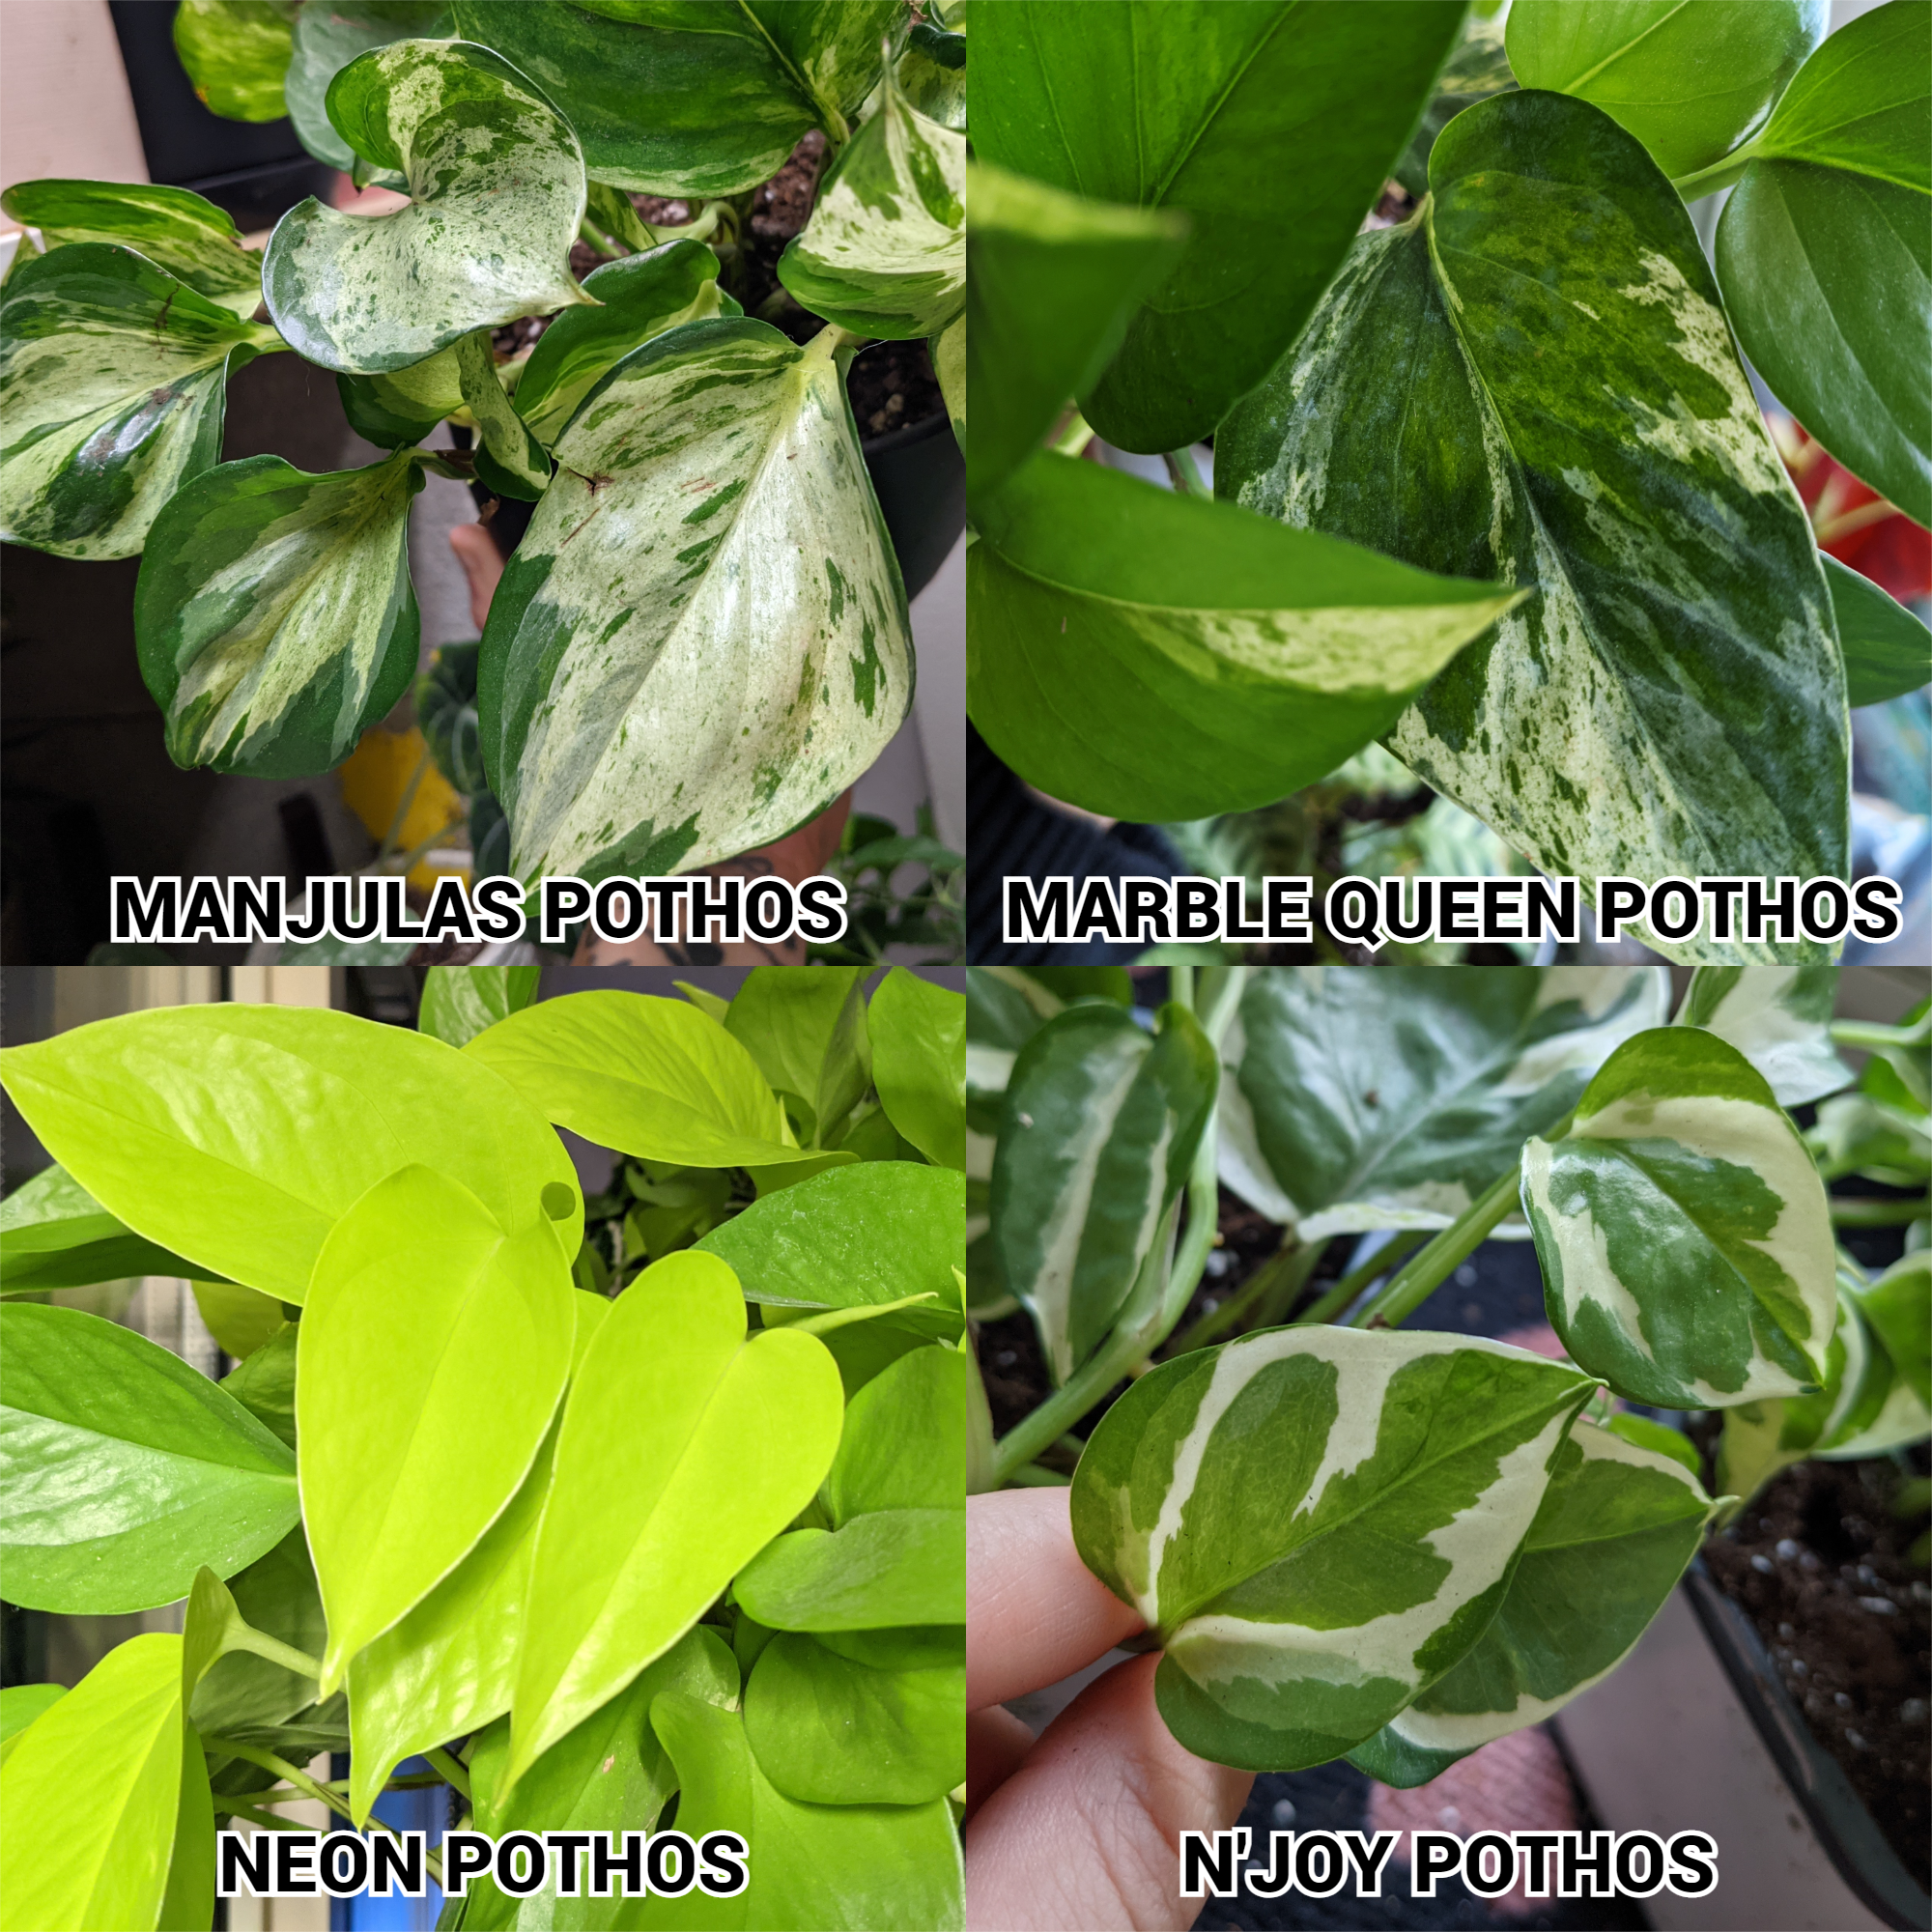 Pothos / Philodendron Cuttings Mystery Box